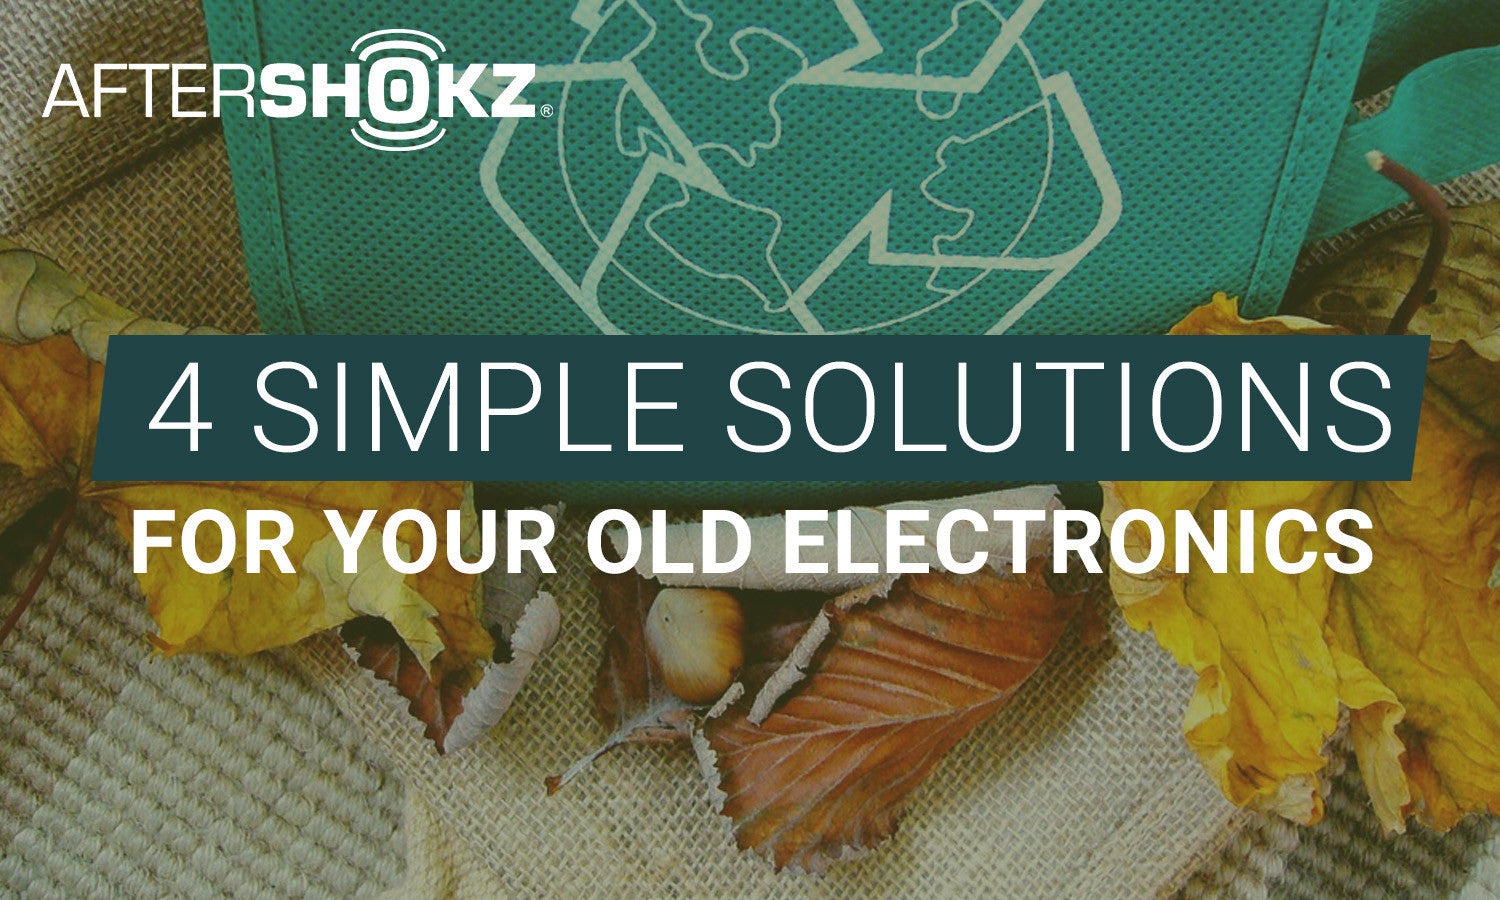 Earth Day - 4 Simple Solutions For Your Old Electronics